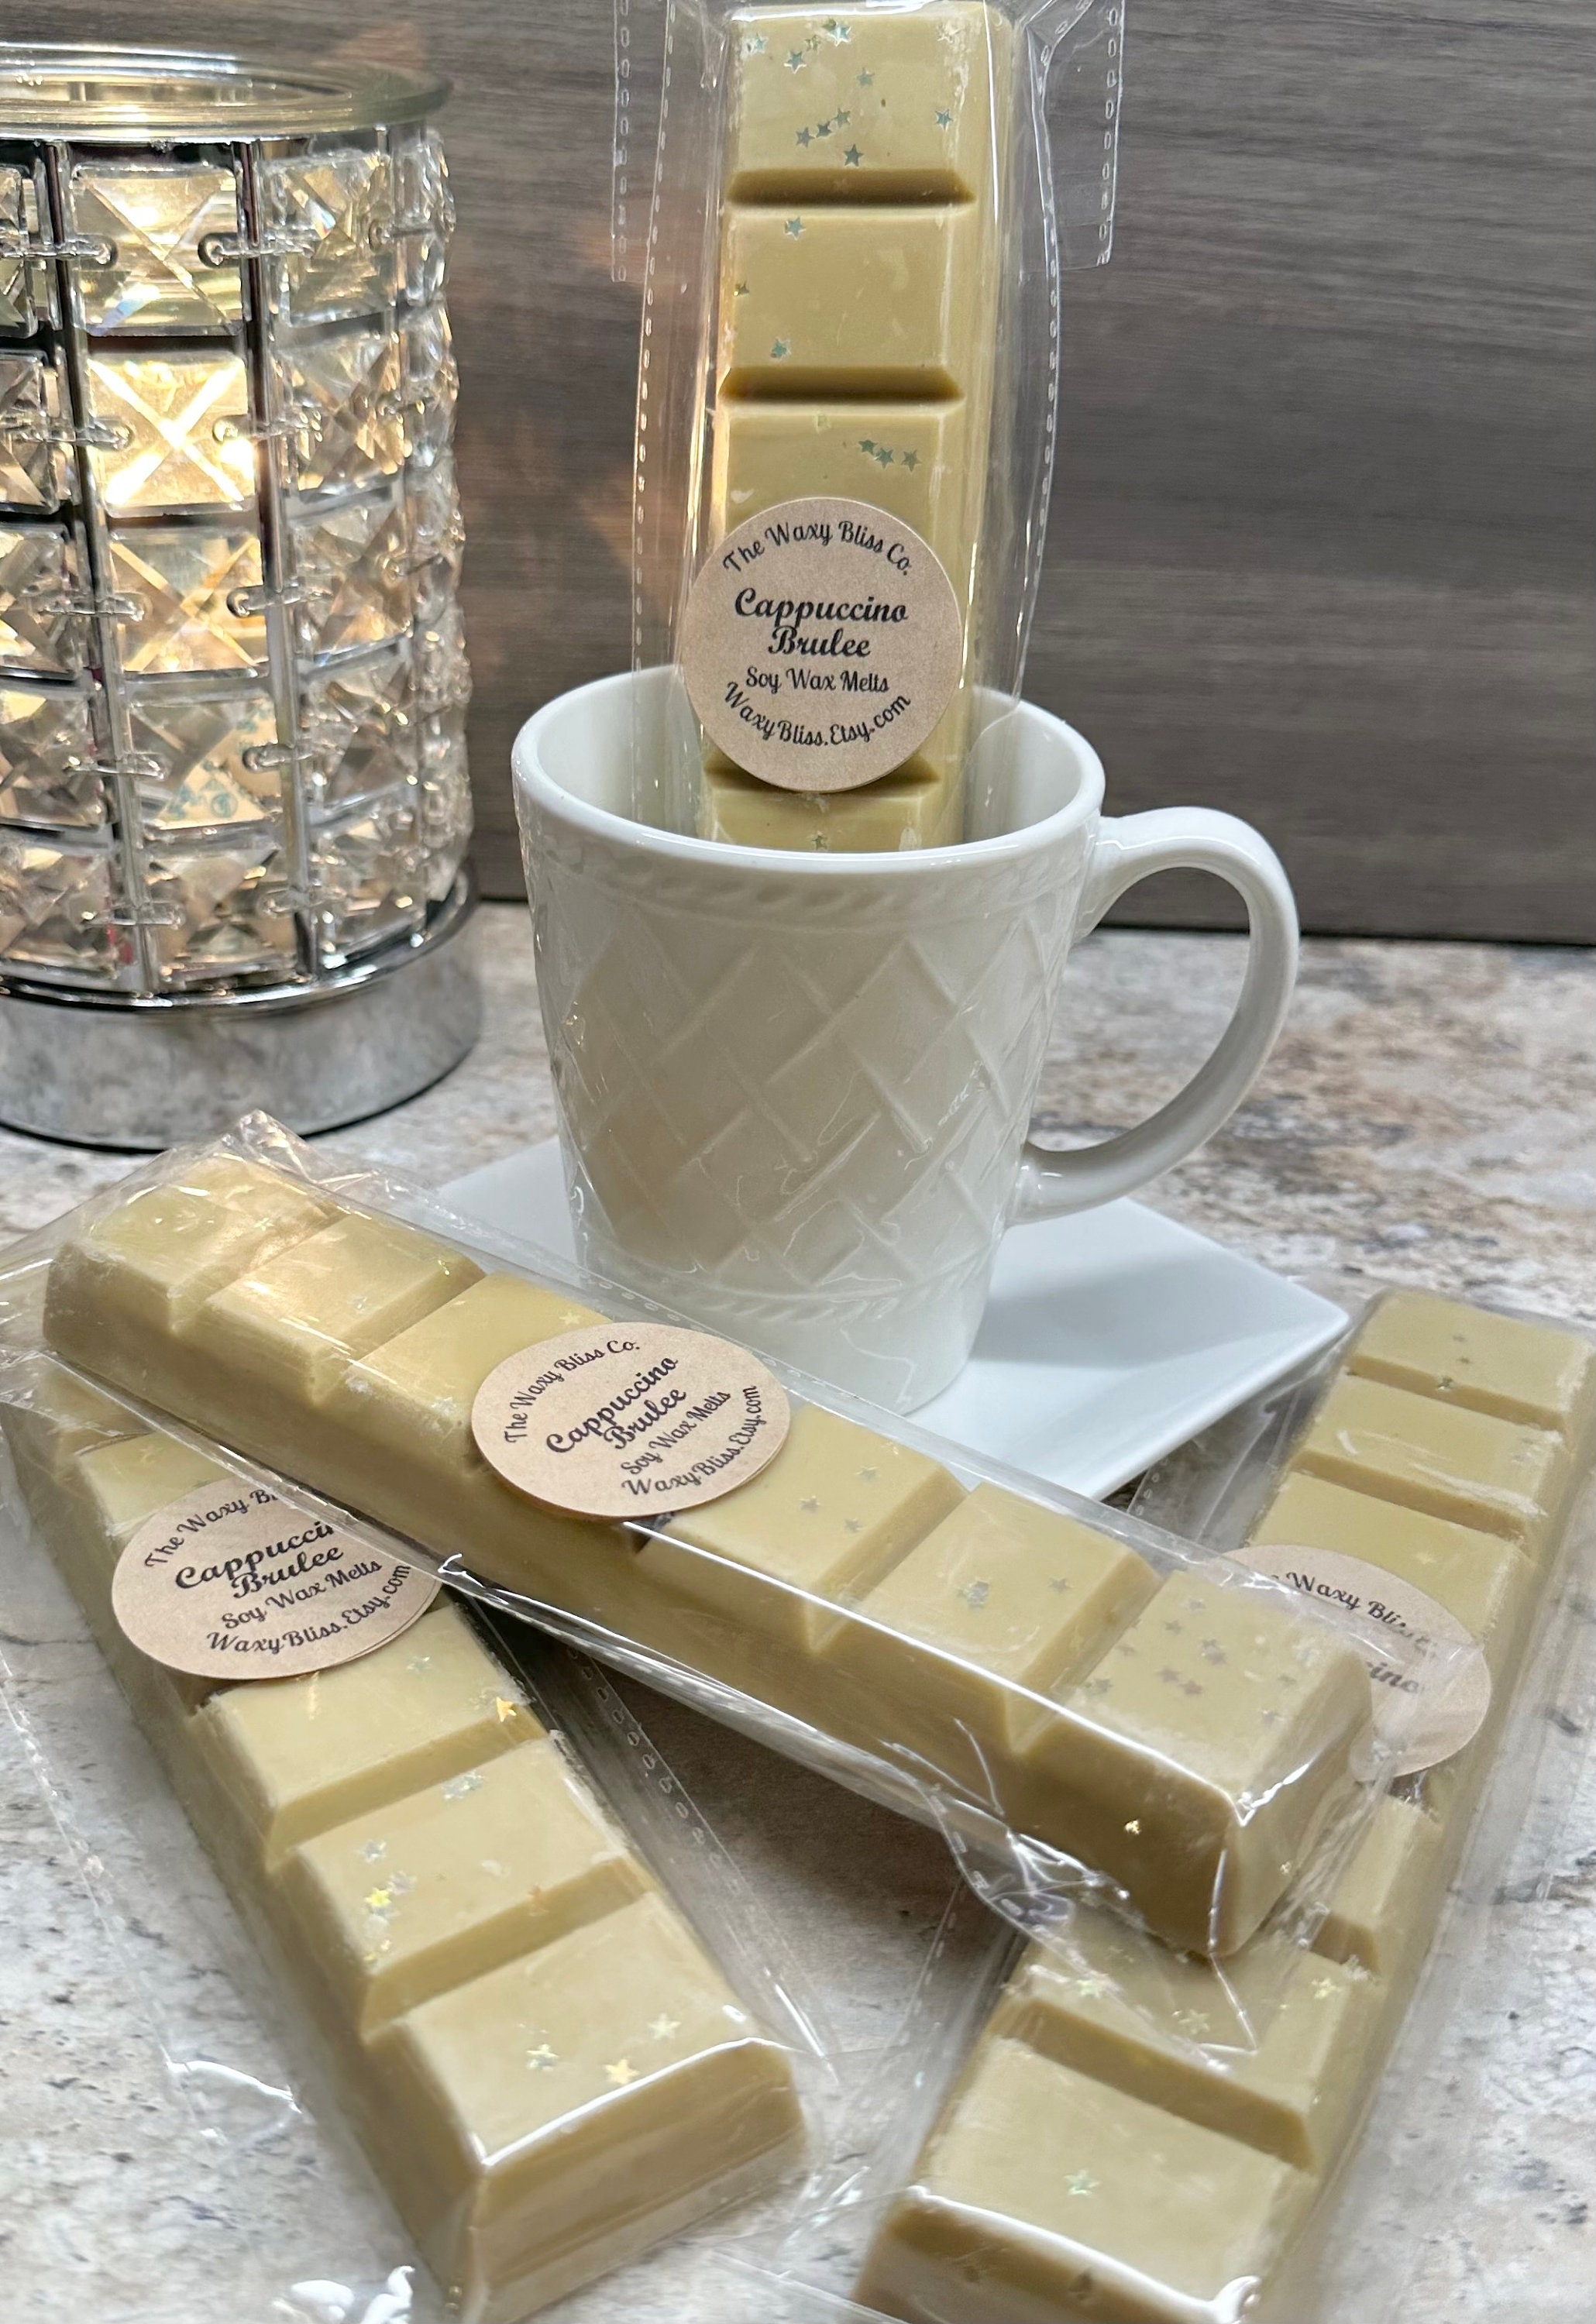 Coffee Scented Wax Melts 100% Soy Wax Cubes Coffee Shop Scented Cappuccino  Scents American Grown Soy Beans Drink Wax Warmer Melts 